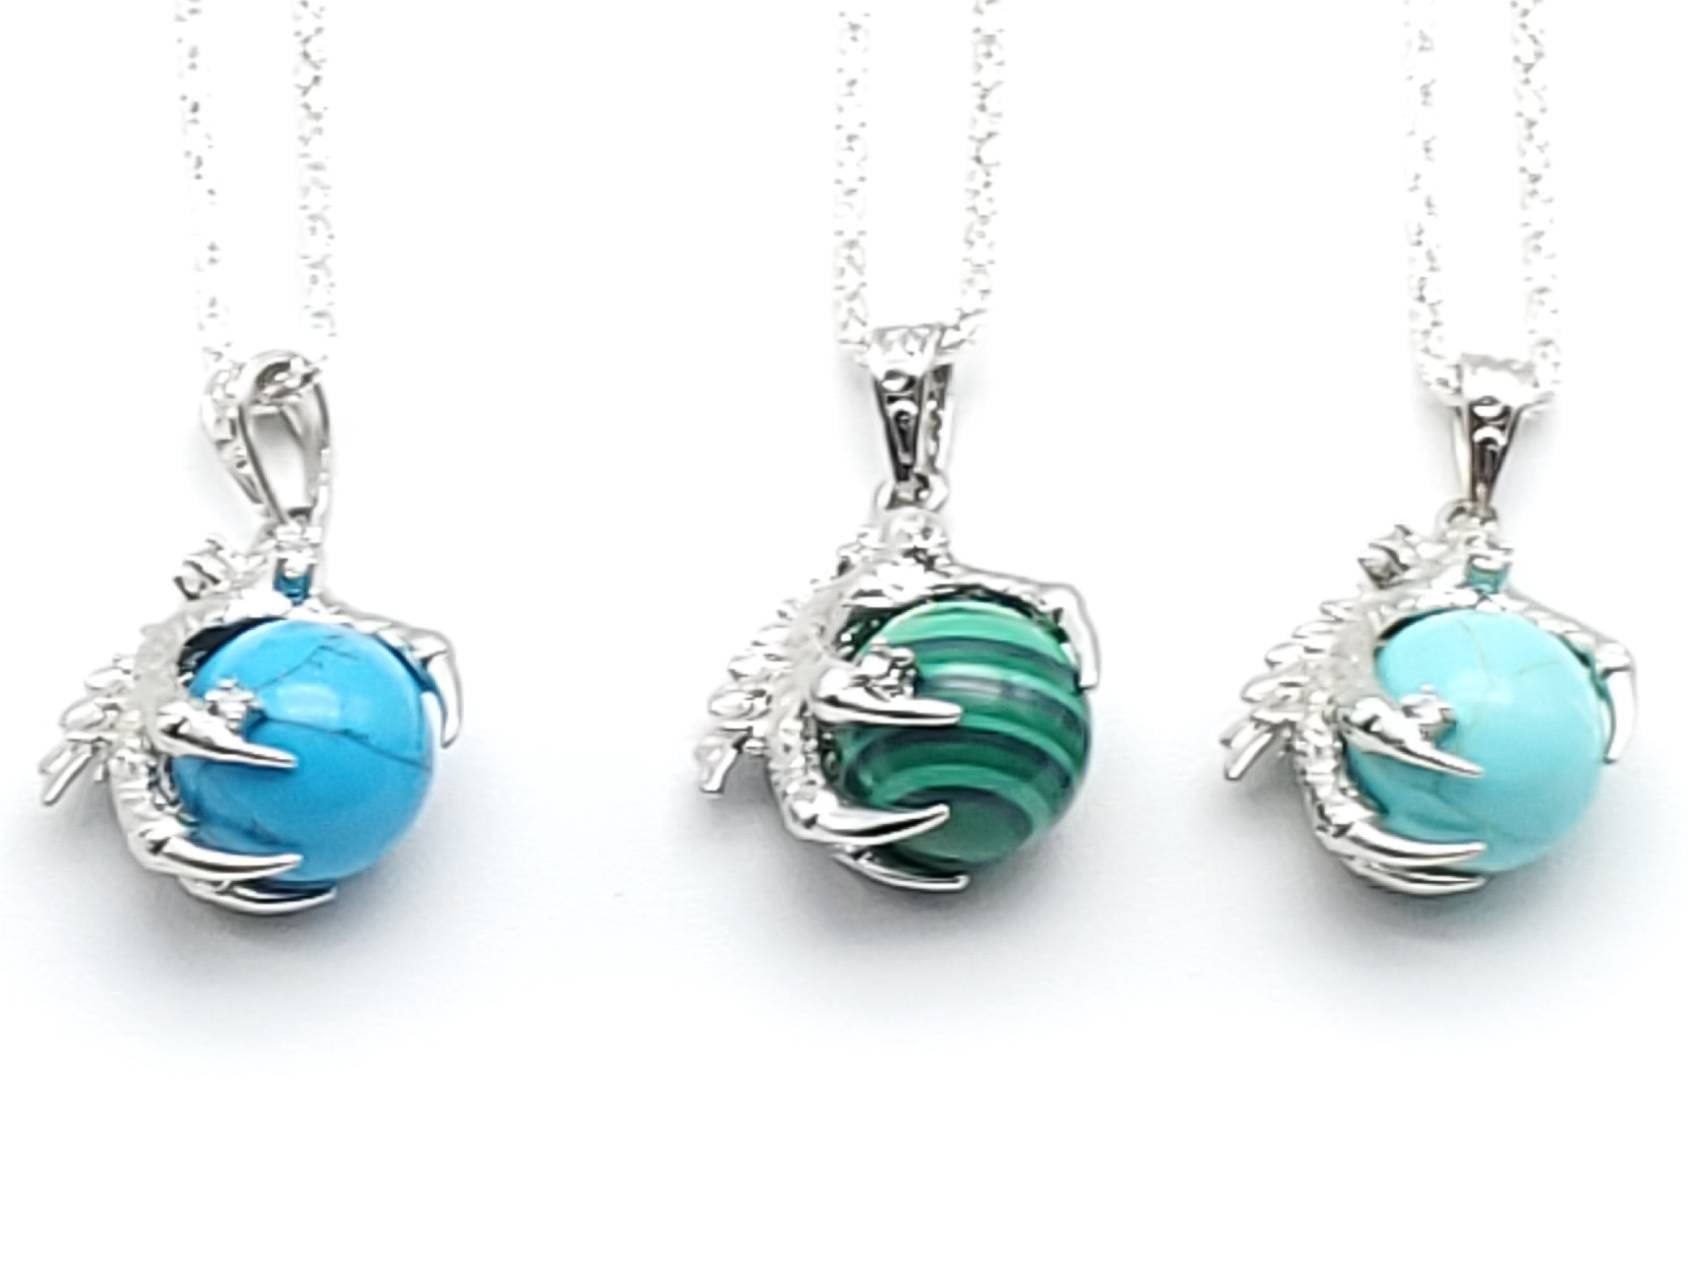 Turquoise Claw Pendant Necklace - The Caffeinated Raven